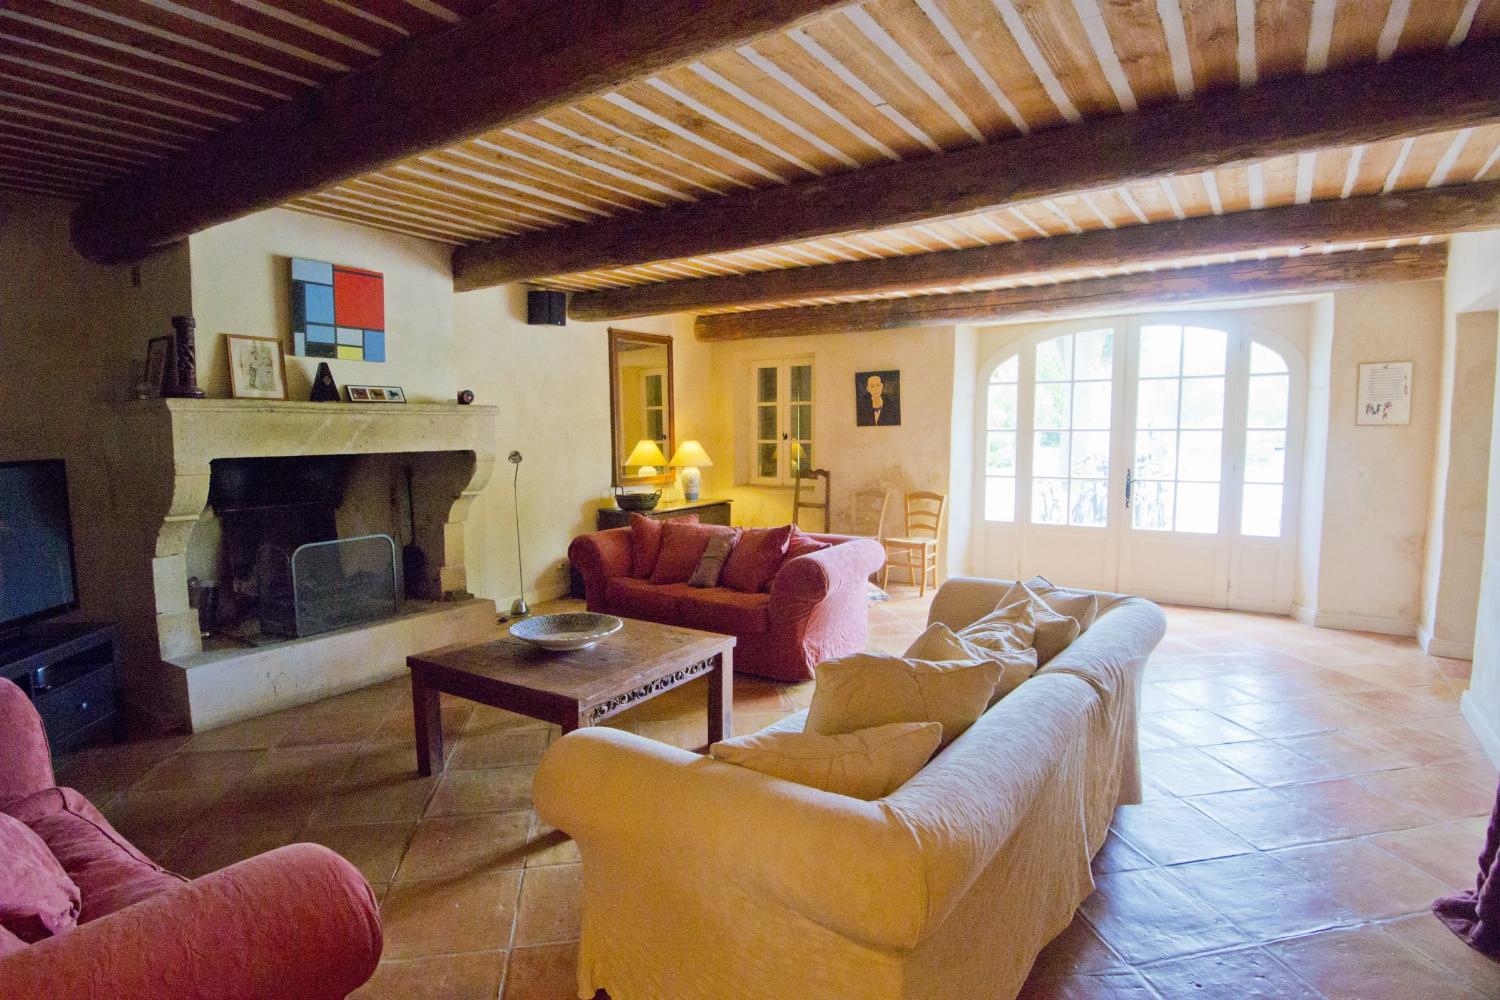 Living room | Rental home in Provence